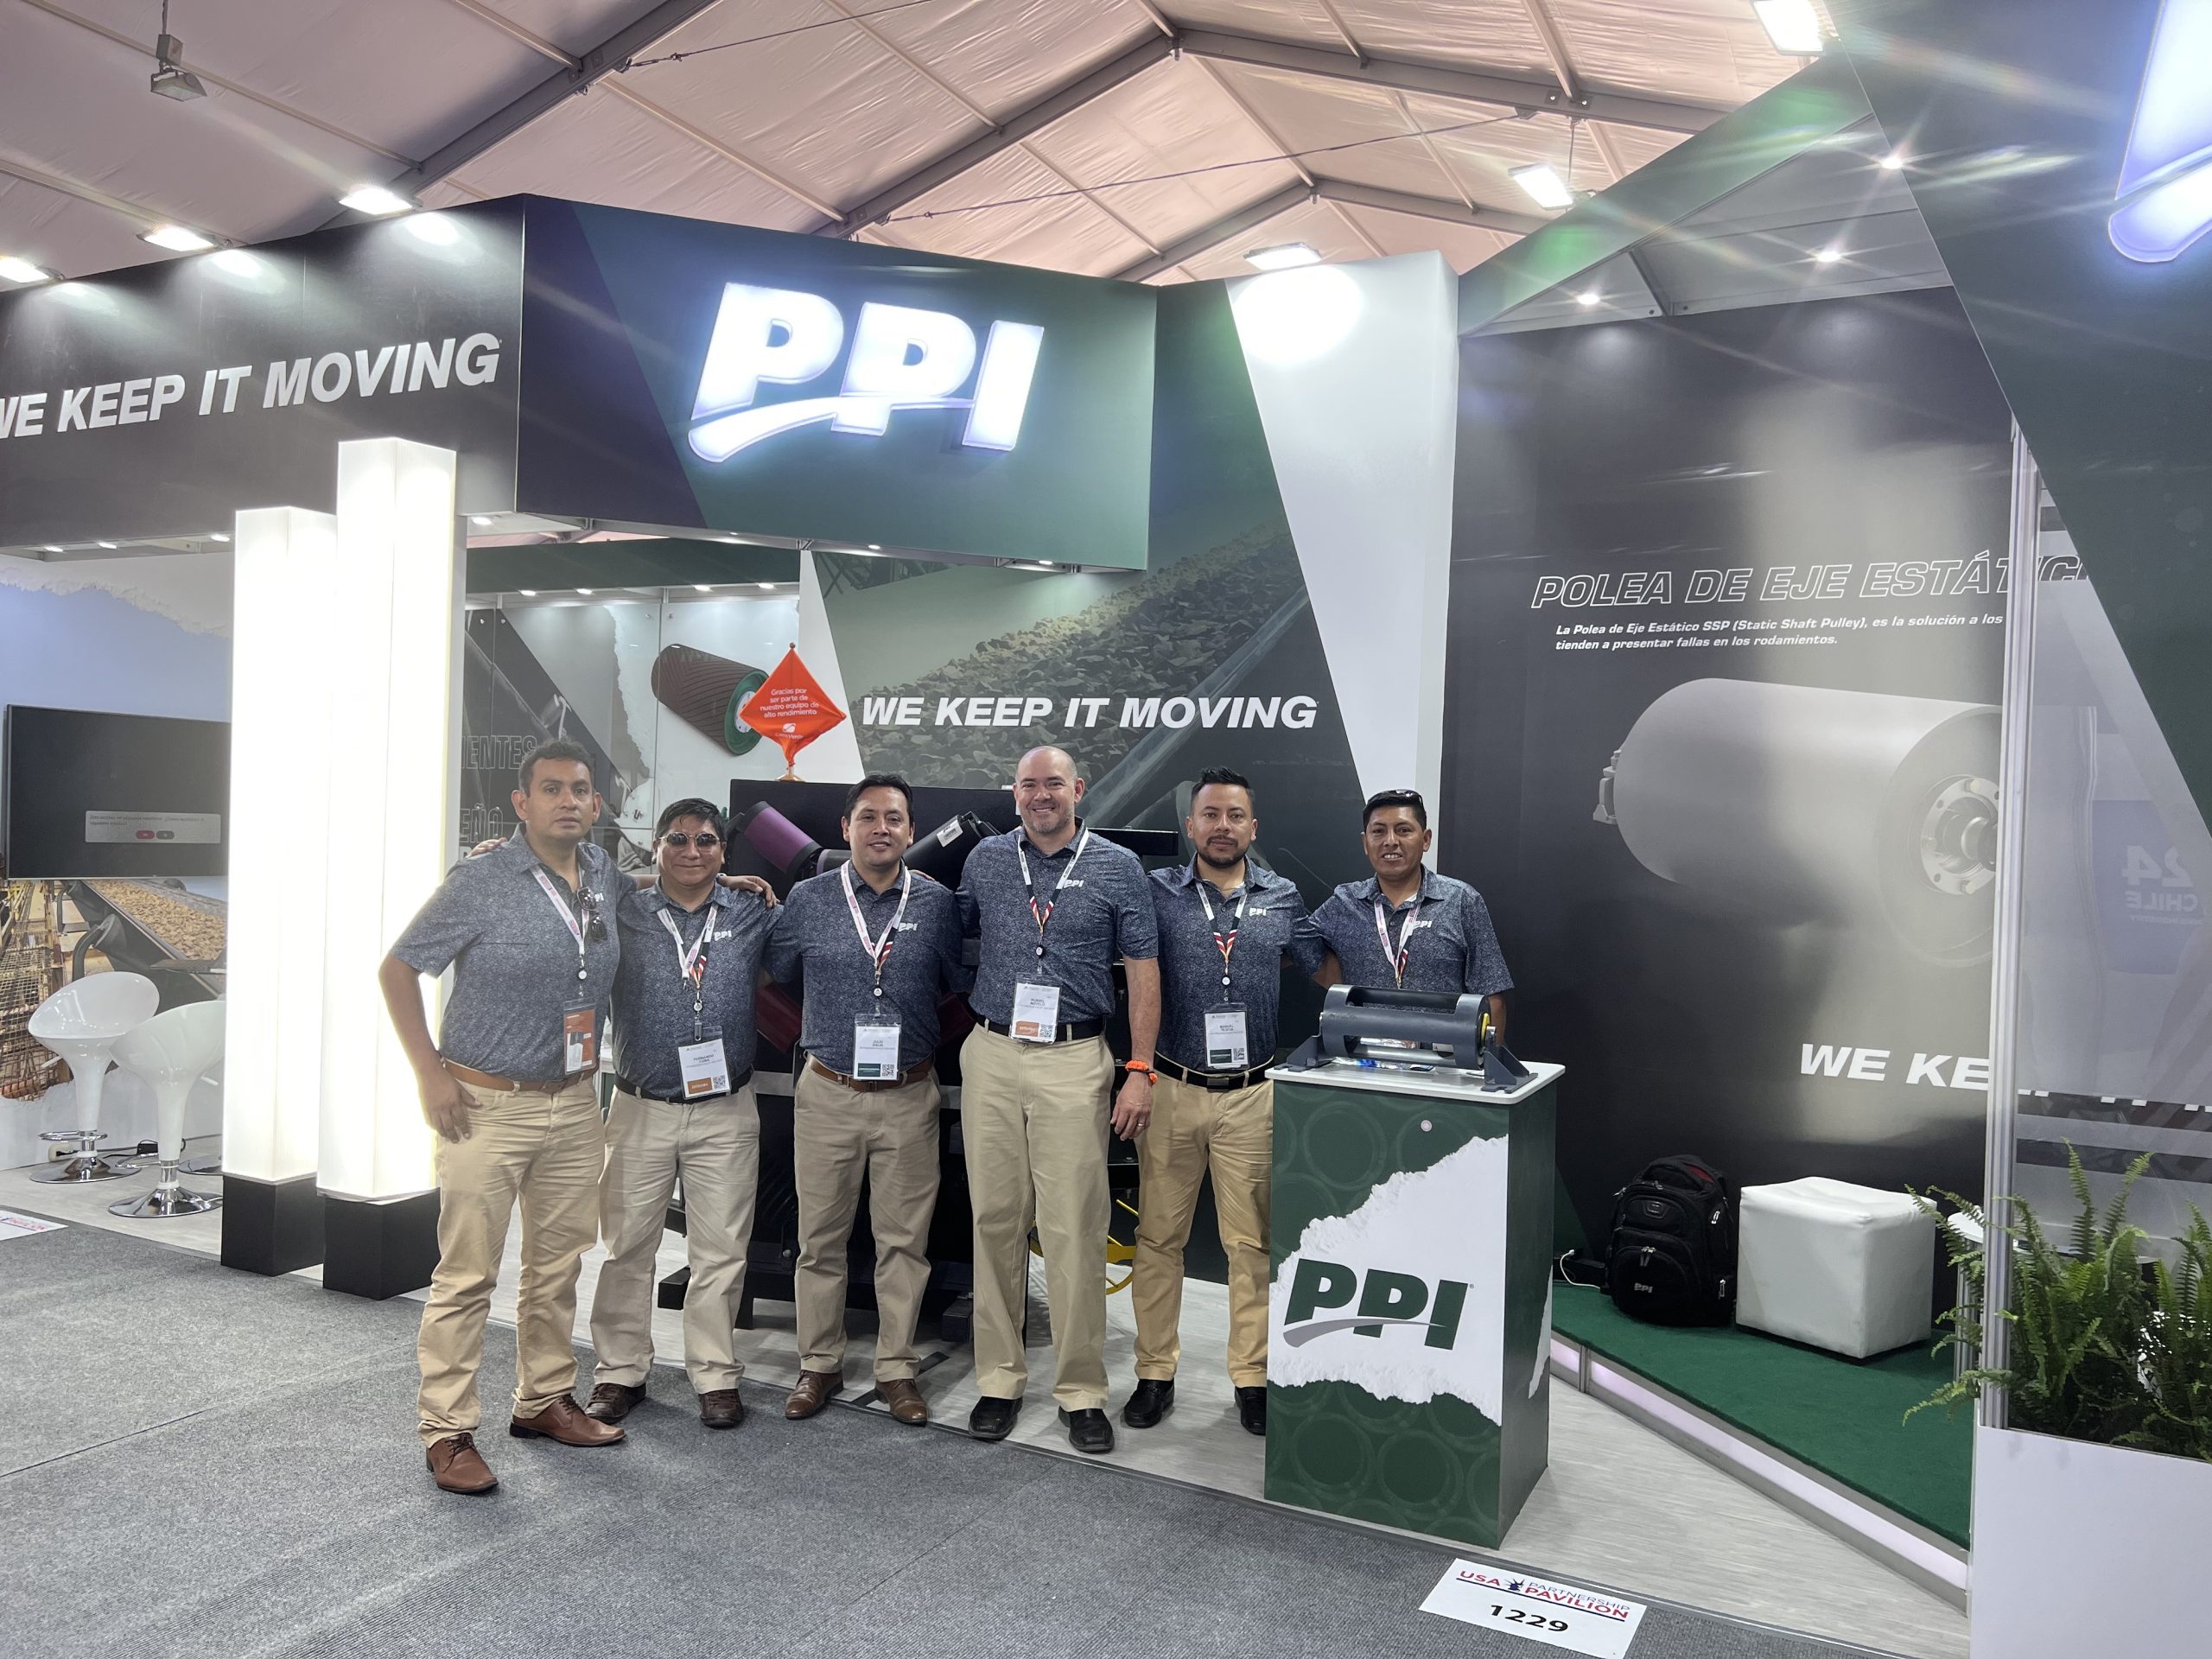 PPI booth